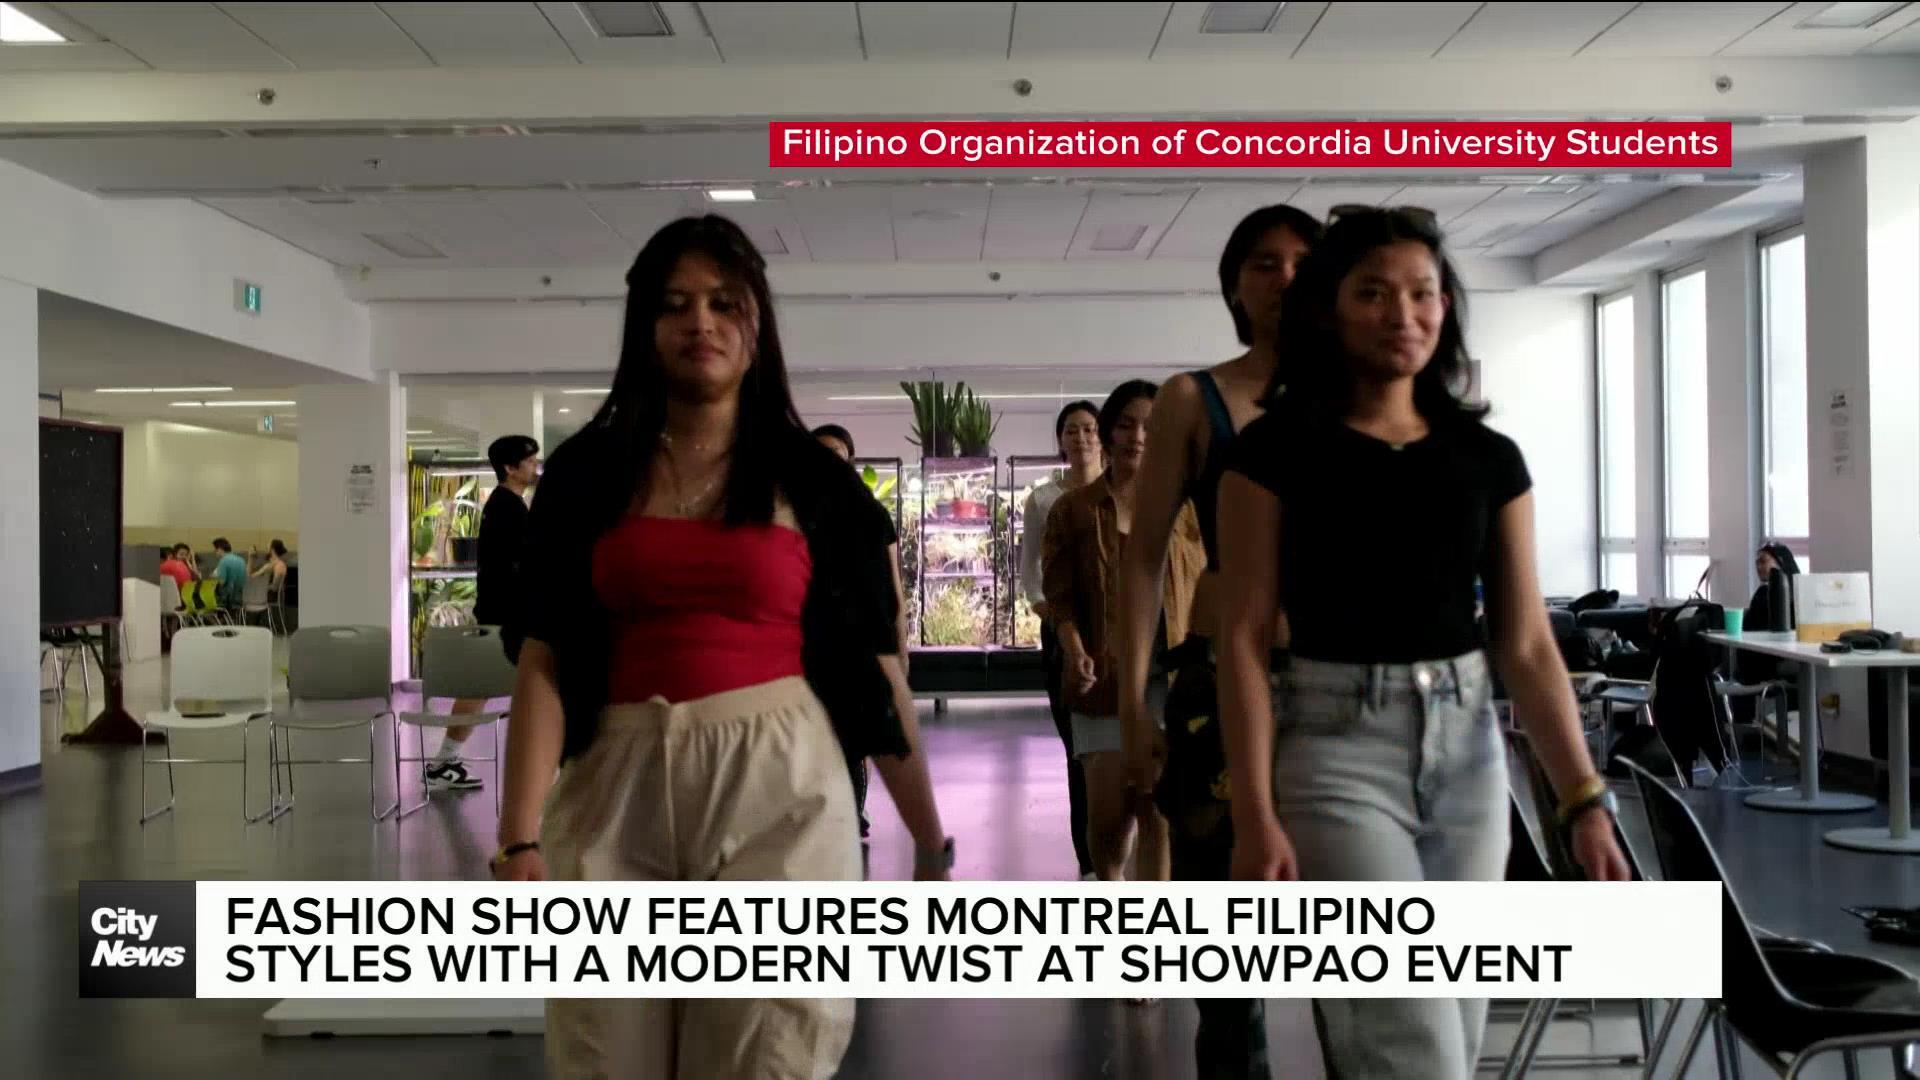 Fashion show features Montreal Filipino styles with a modern twist